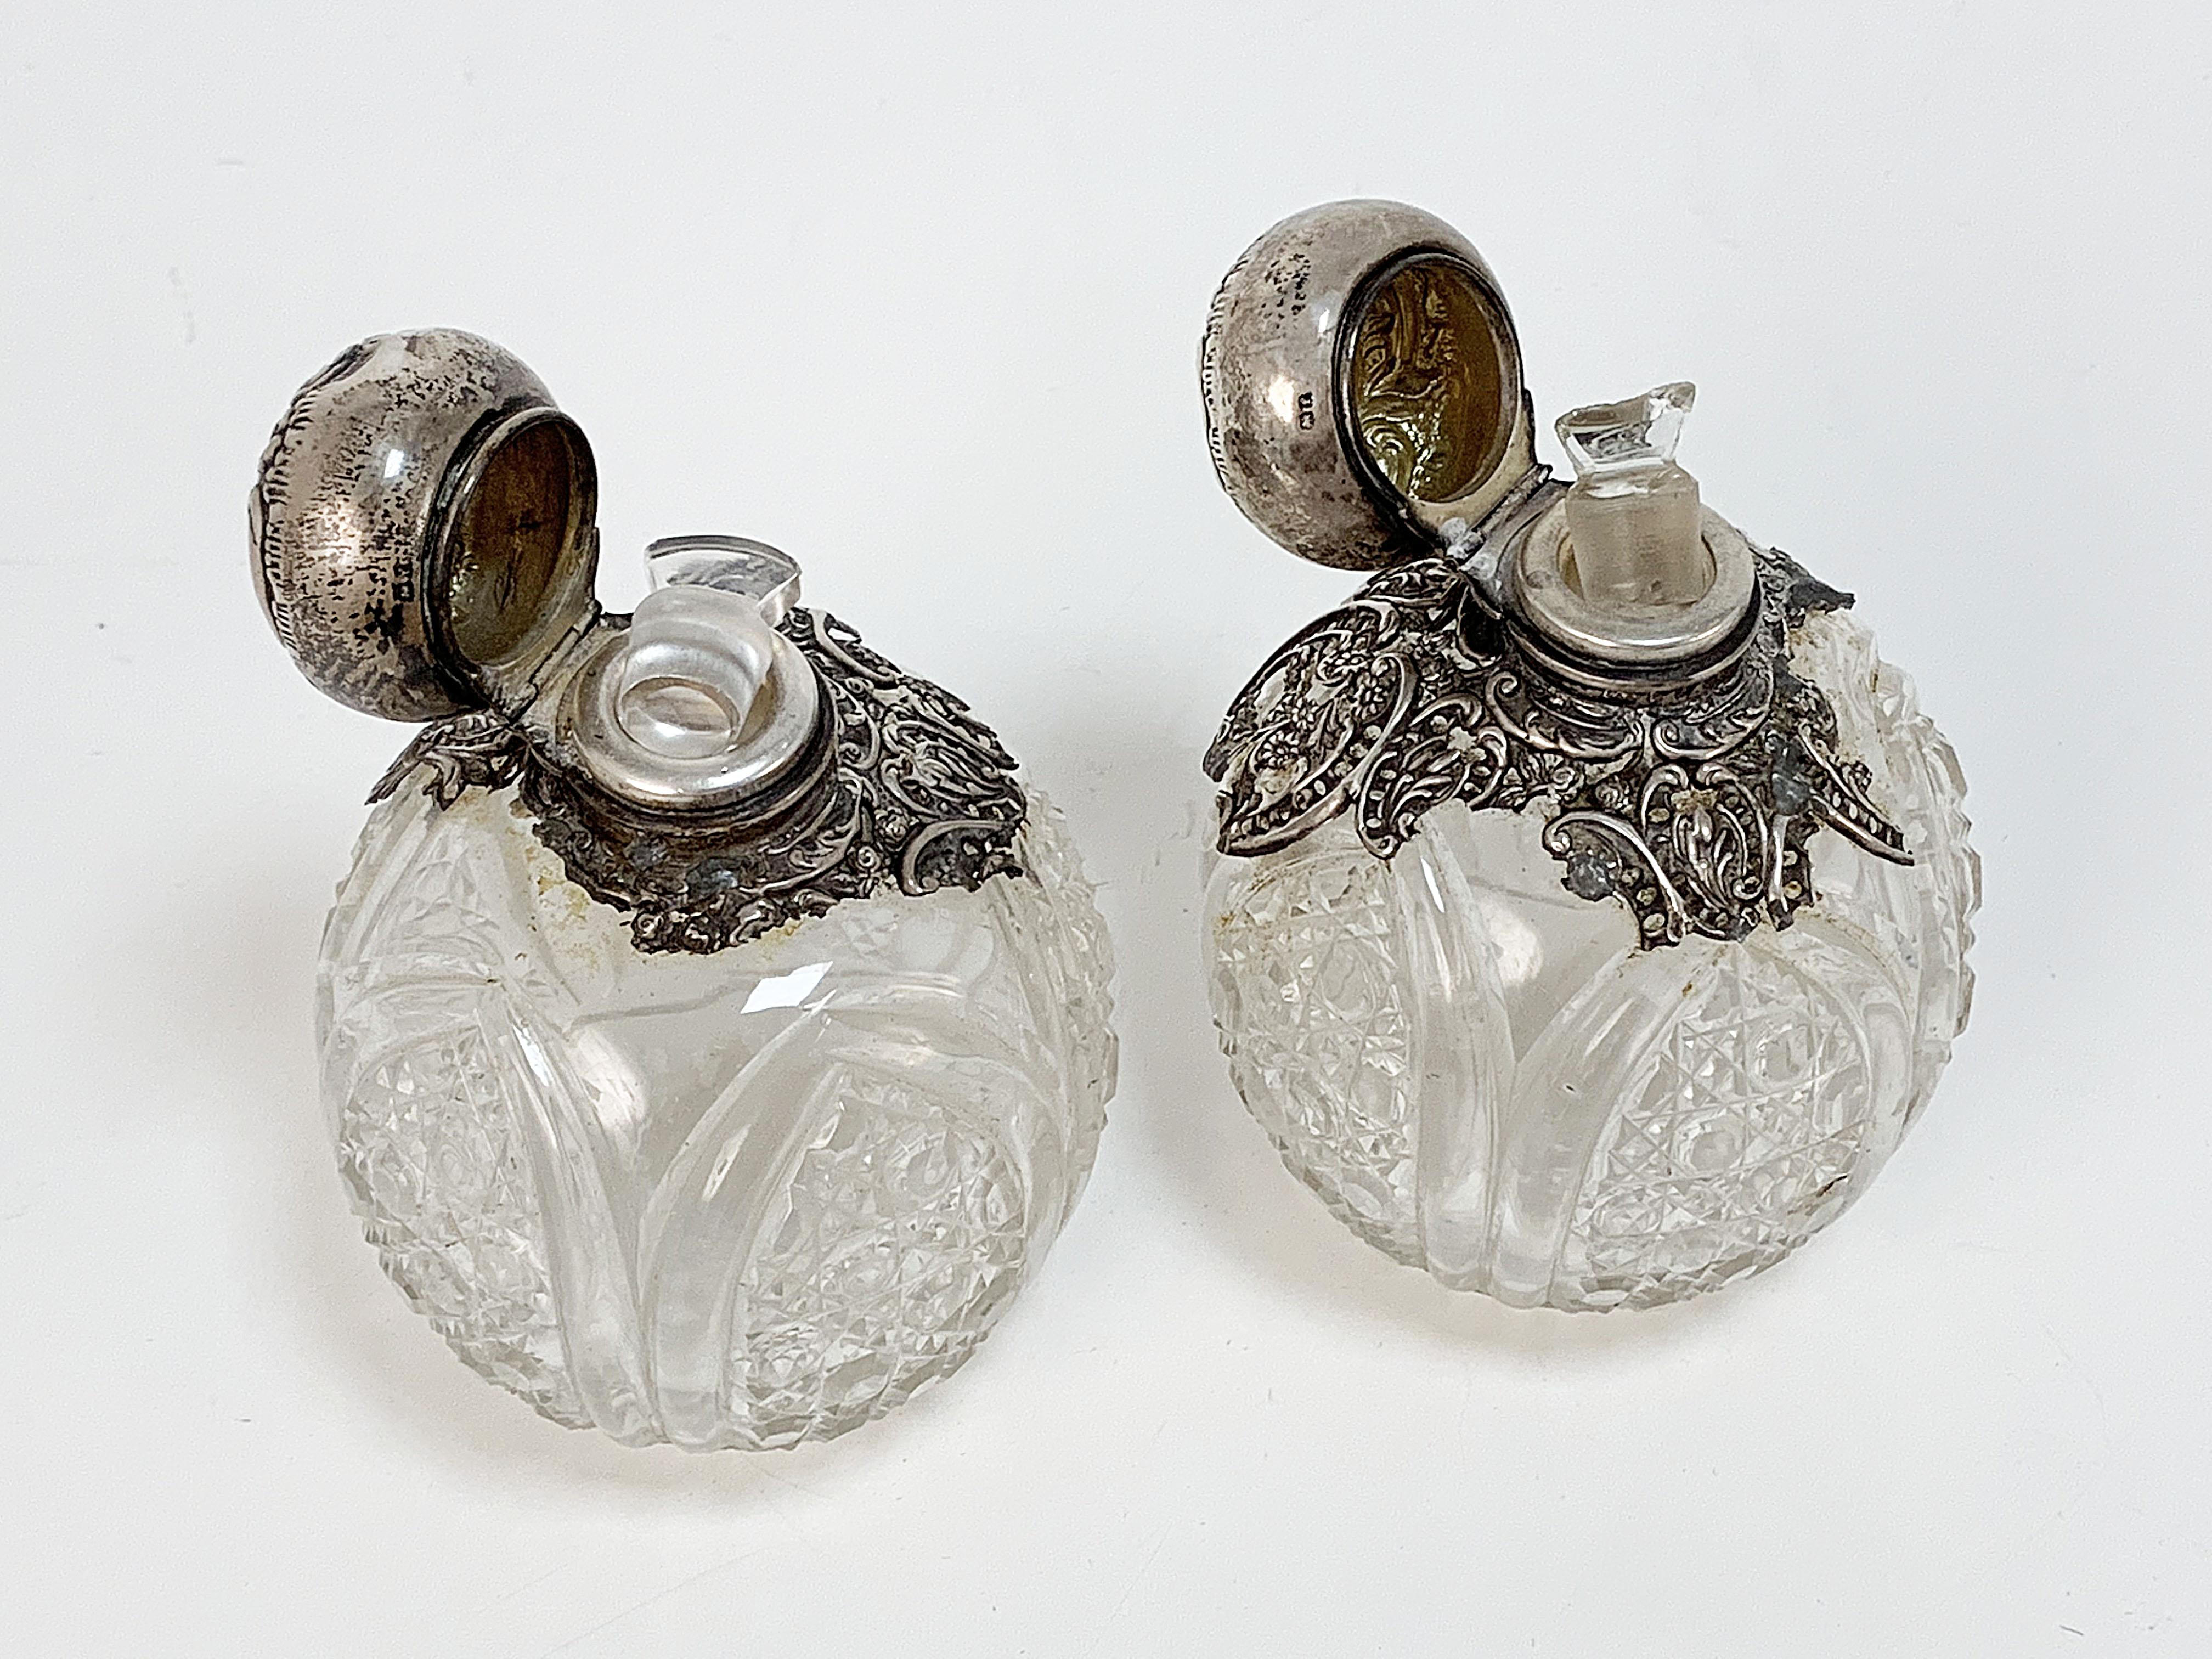 Early Victorian Pair of Antique Perfume Bottles, Sterling Silver and Crystal, England Early 1900